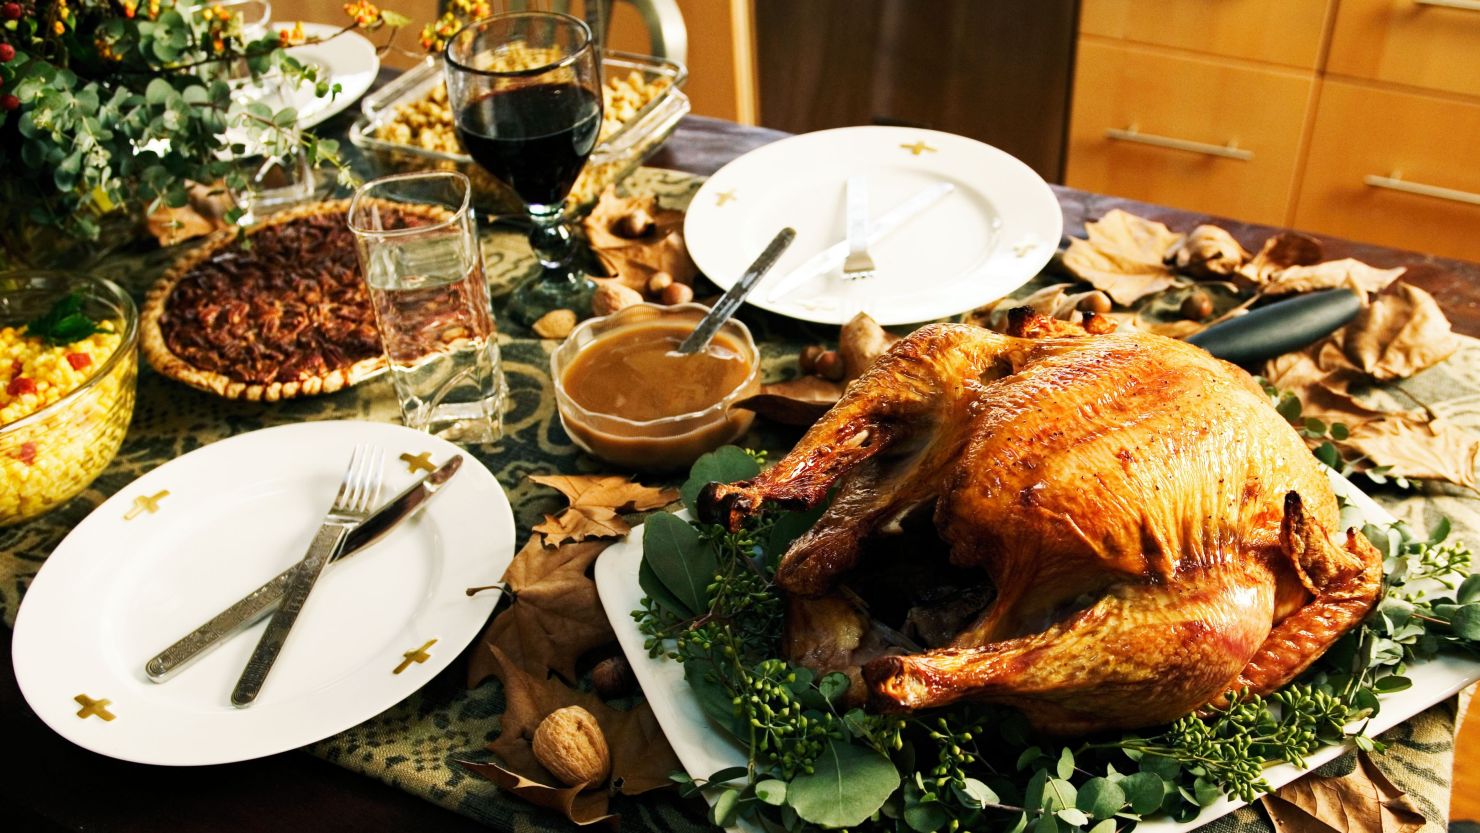 A table laden with holiday food offerings can present a minefield for people with food allergies.